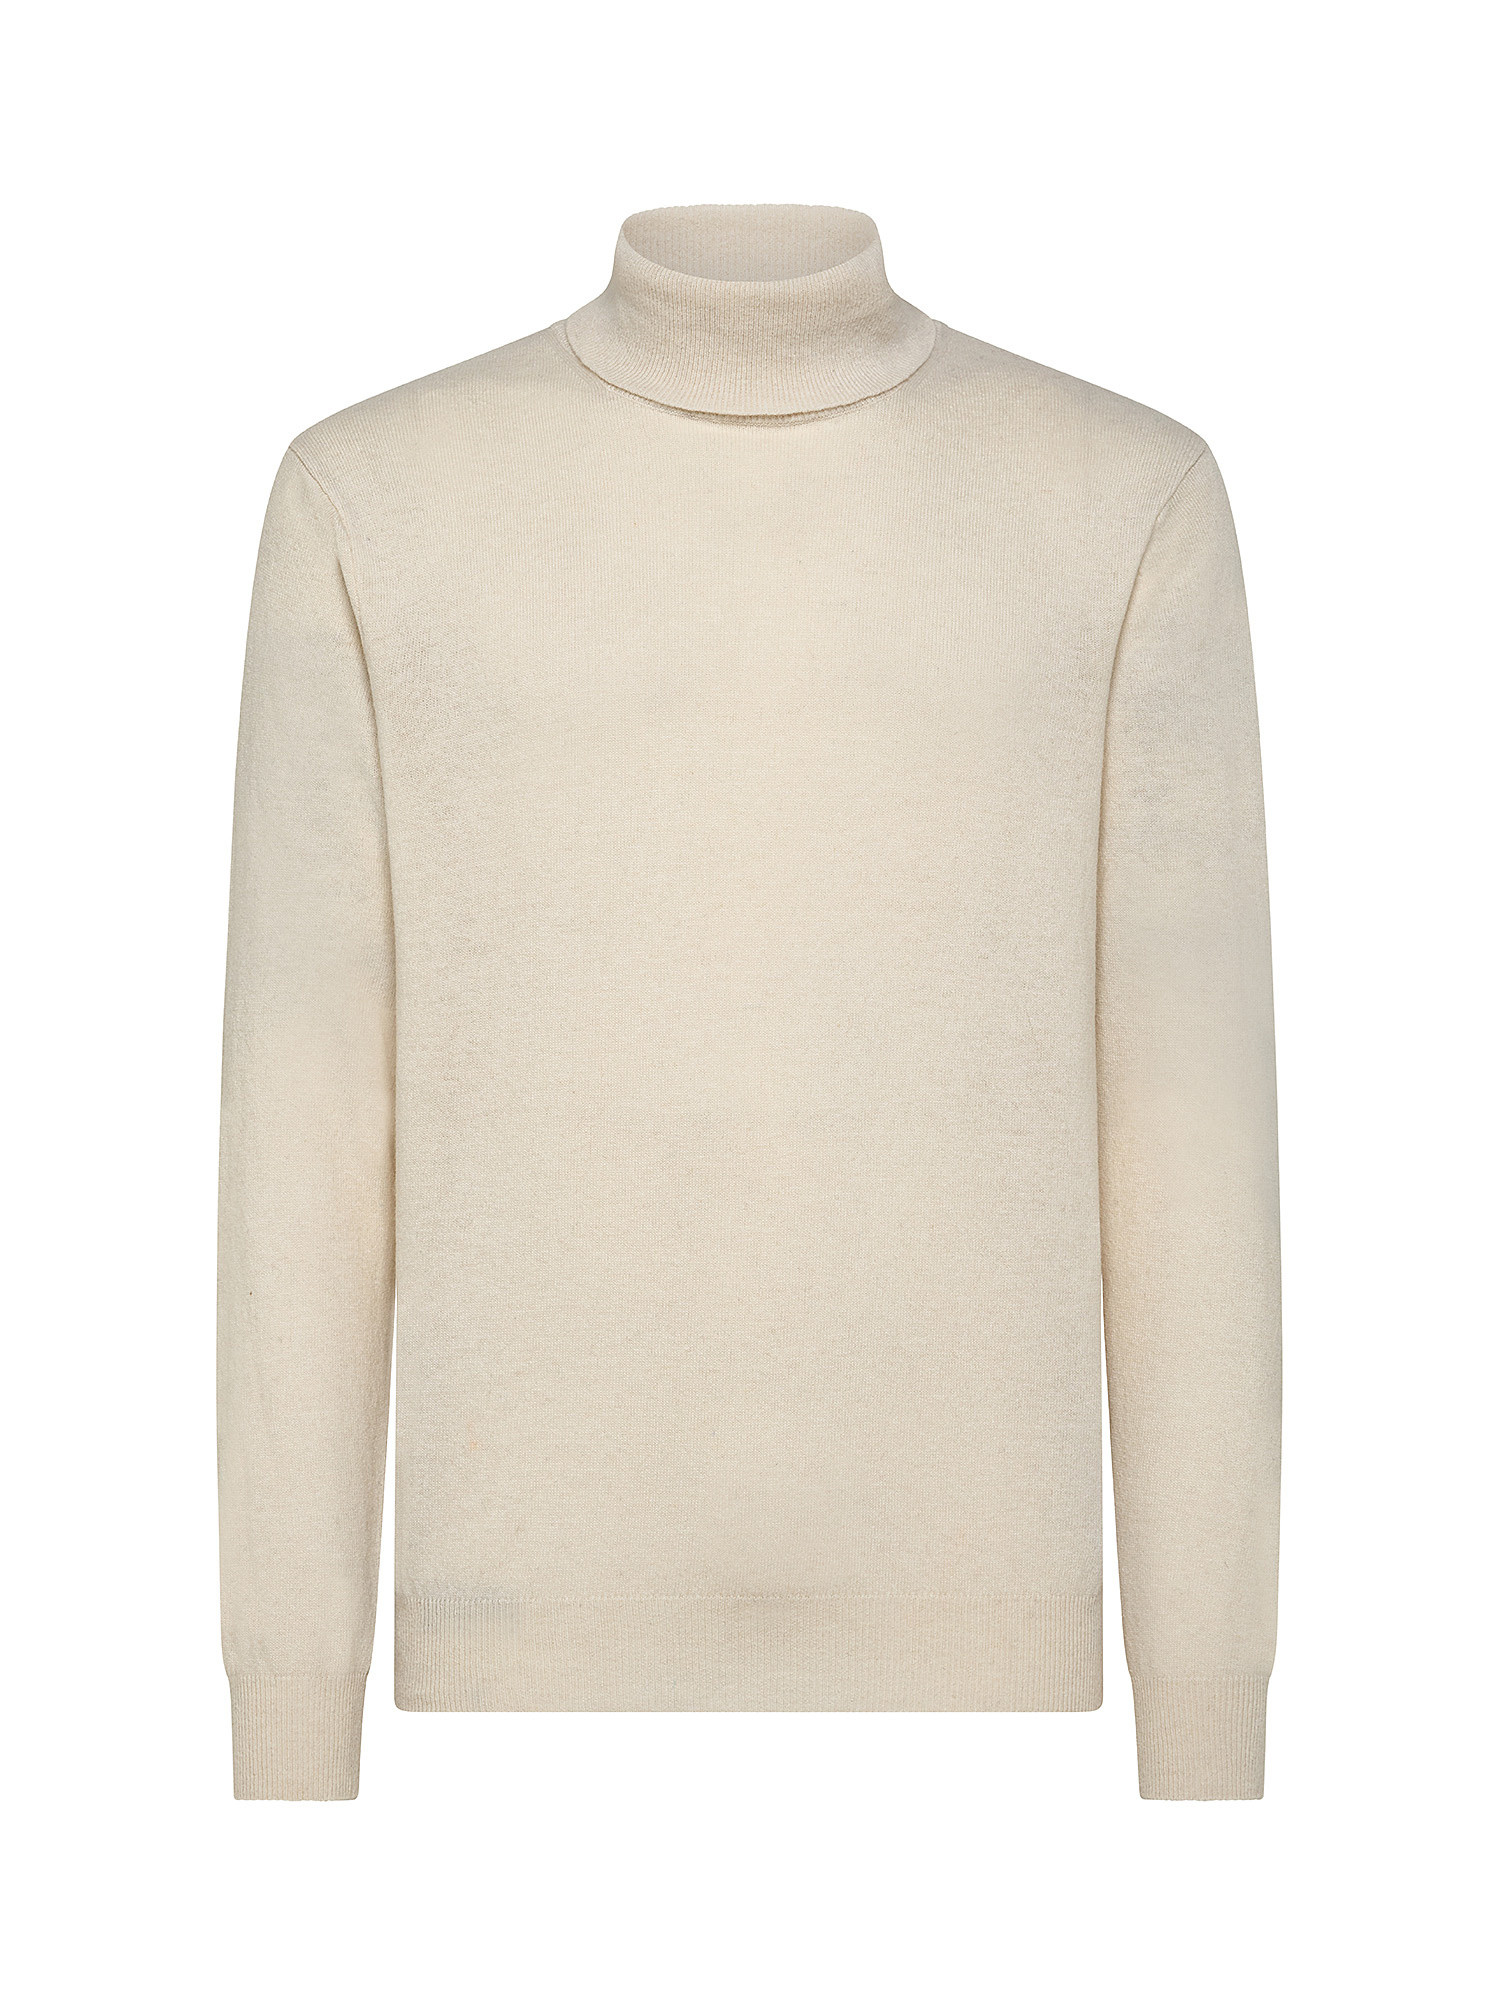 Cashmere Blend turtleneck with noble fibers, Off White, large image number 0